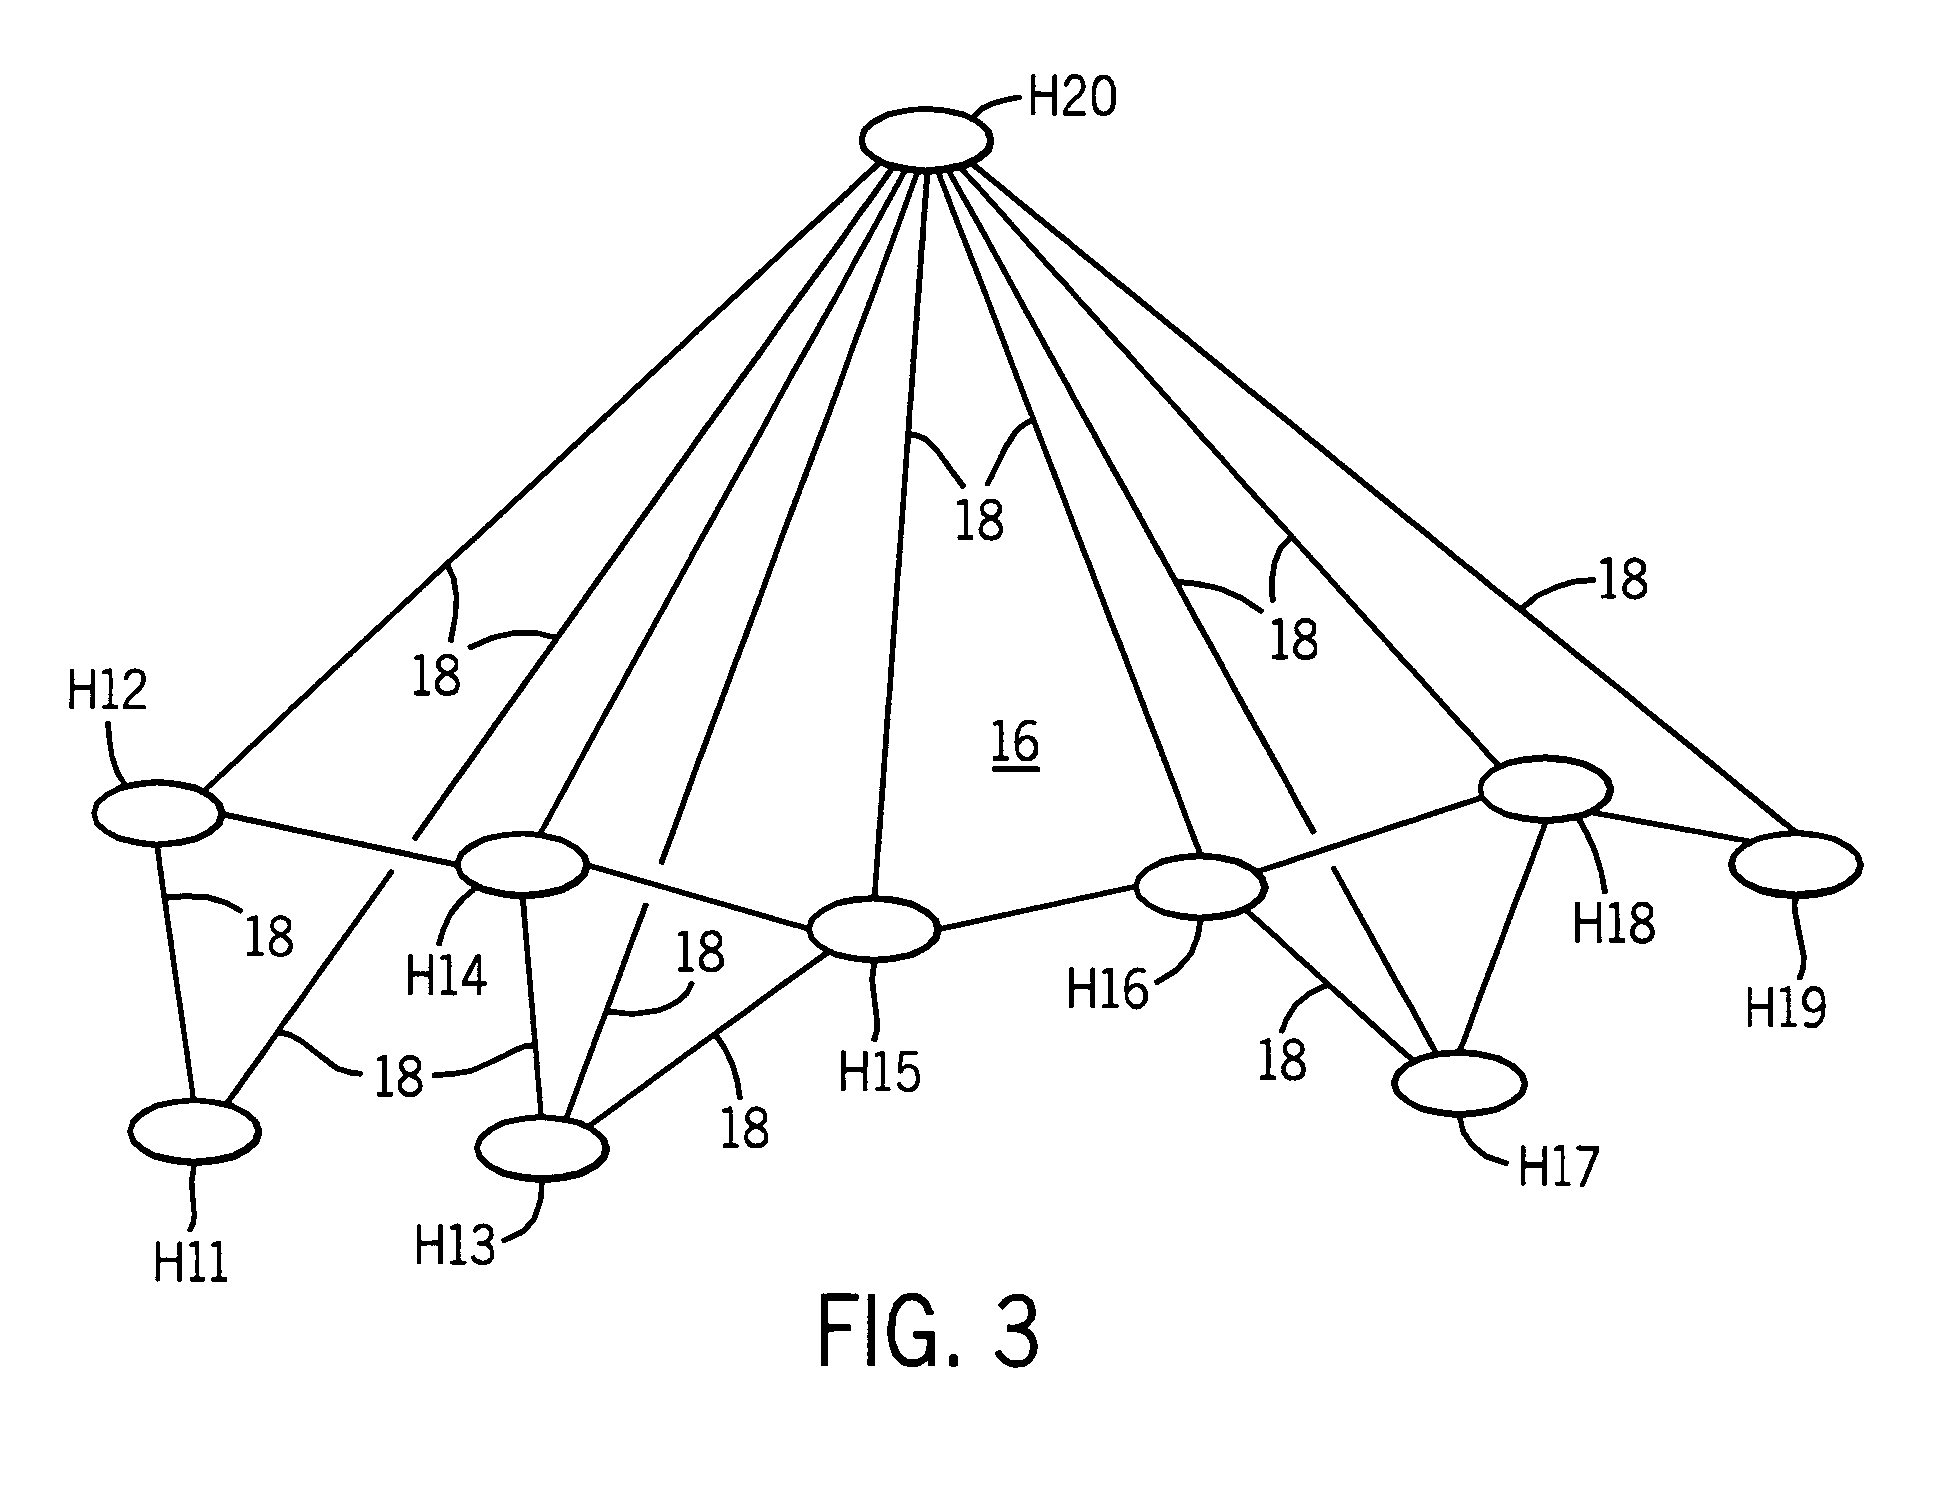 Network routing process for regulating traffic through advantaged and disadvantaged nodes